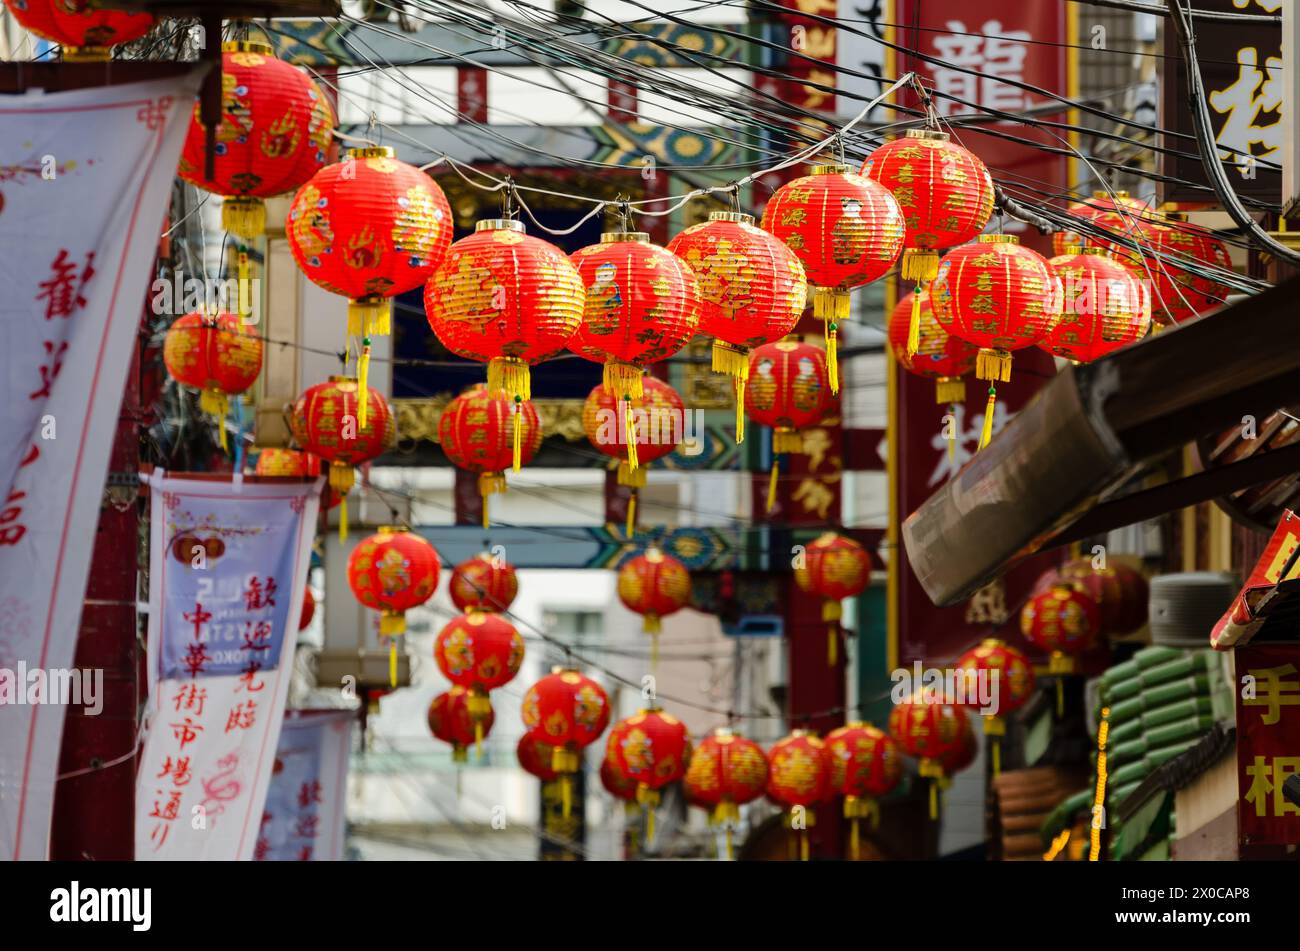 A street with many red lanterns hanging from the wires. The lanterns are red and have Chinese characters on them Stock Photo